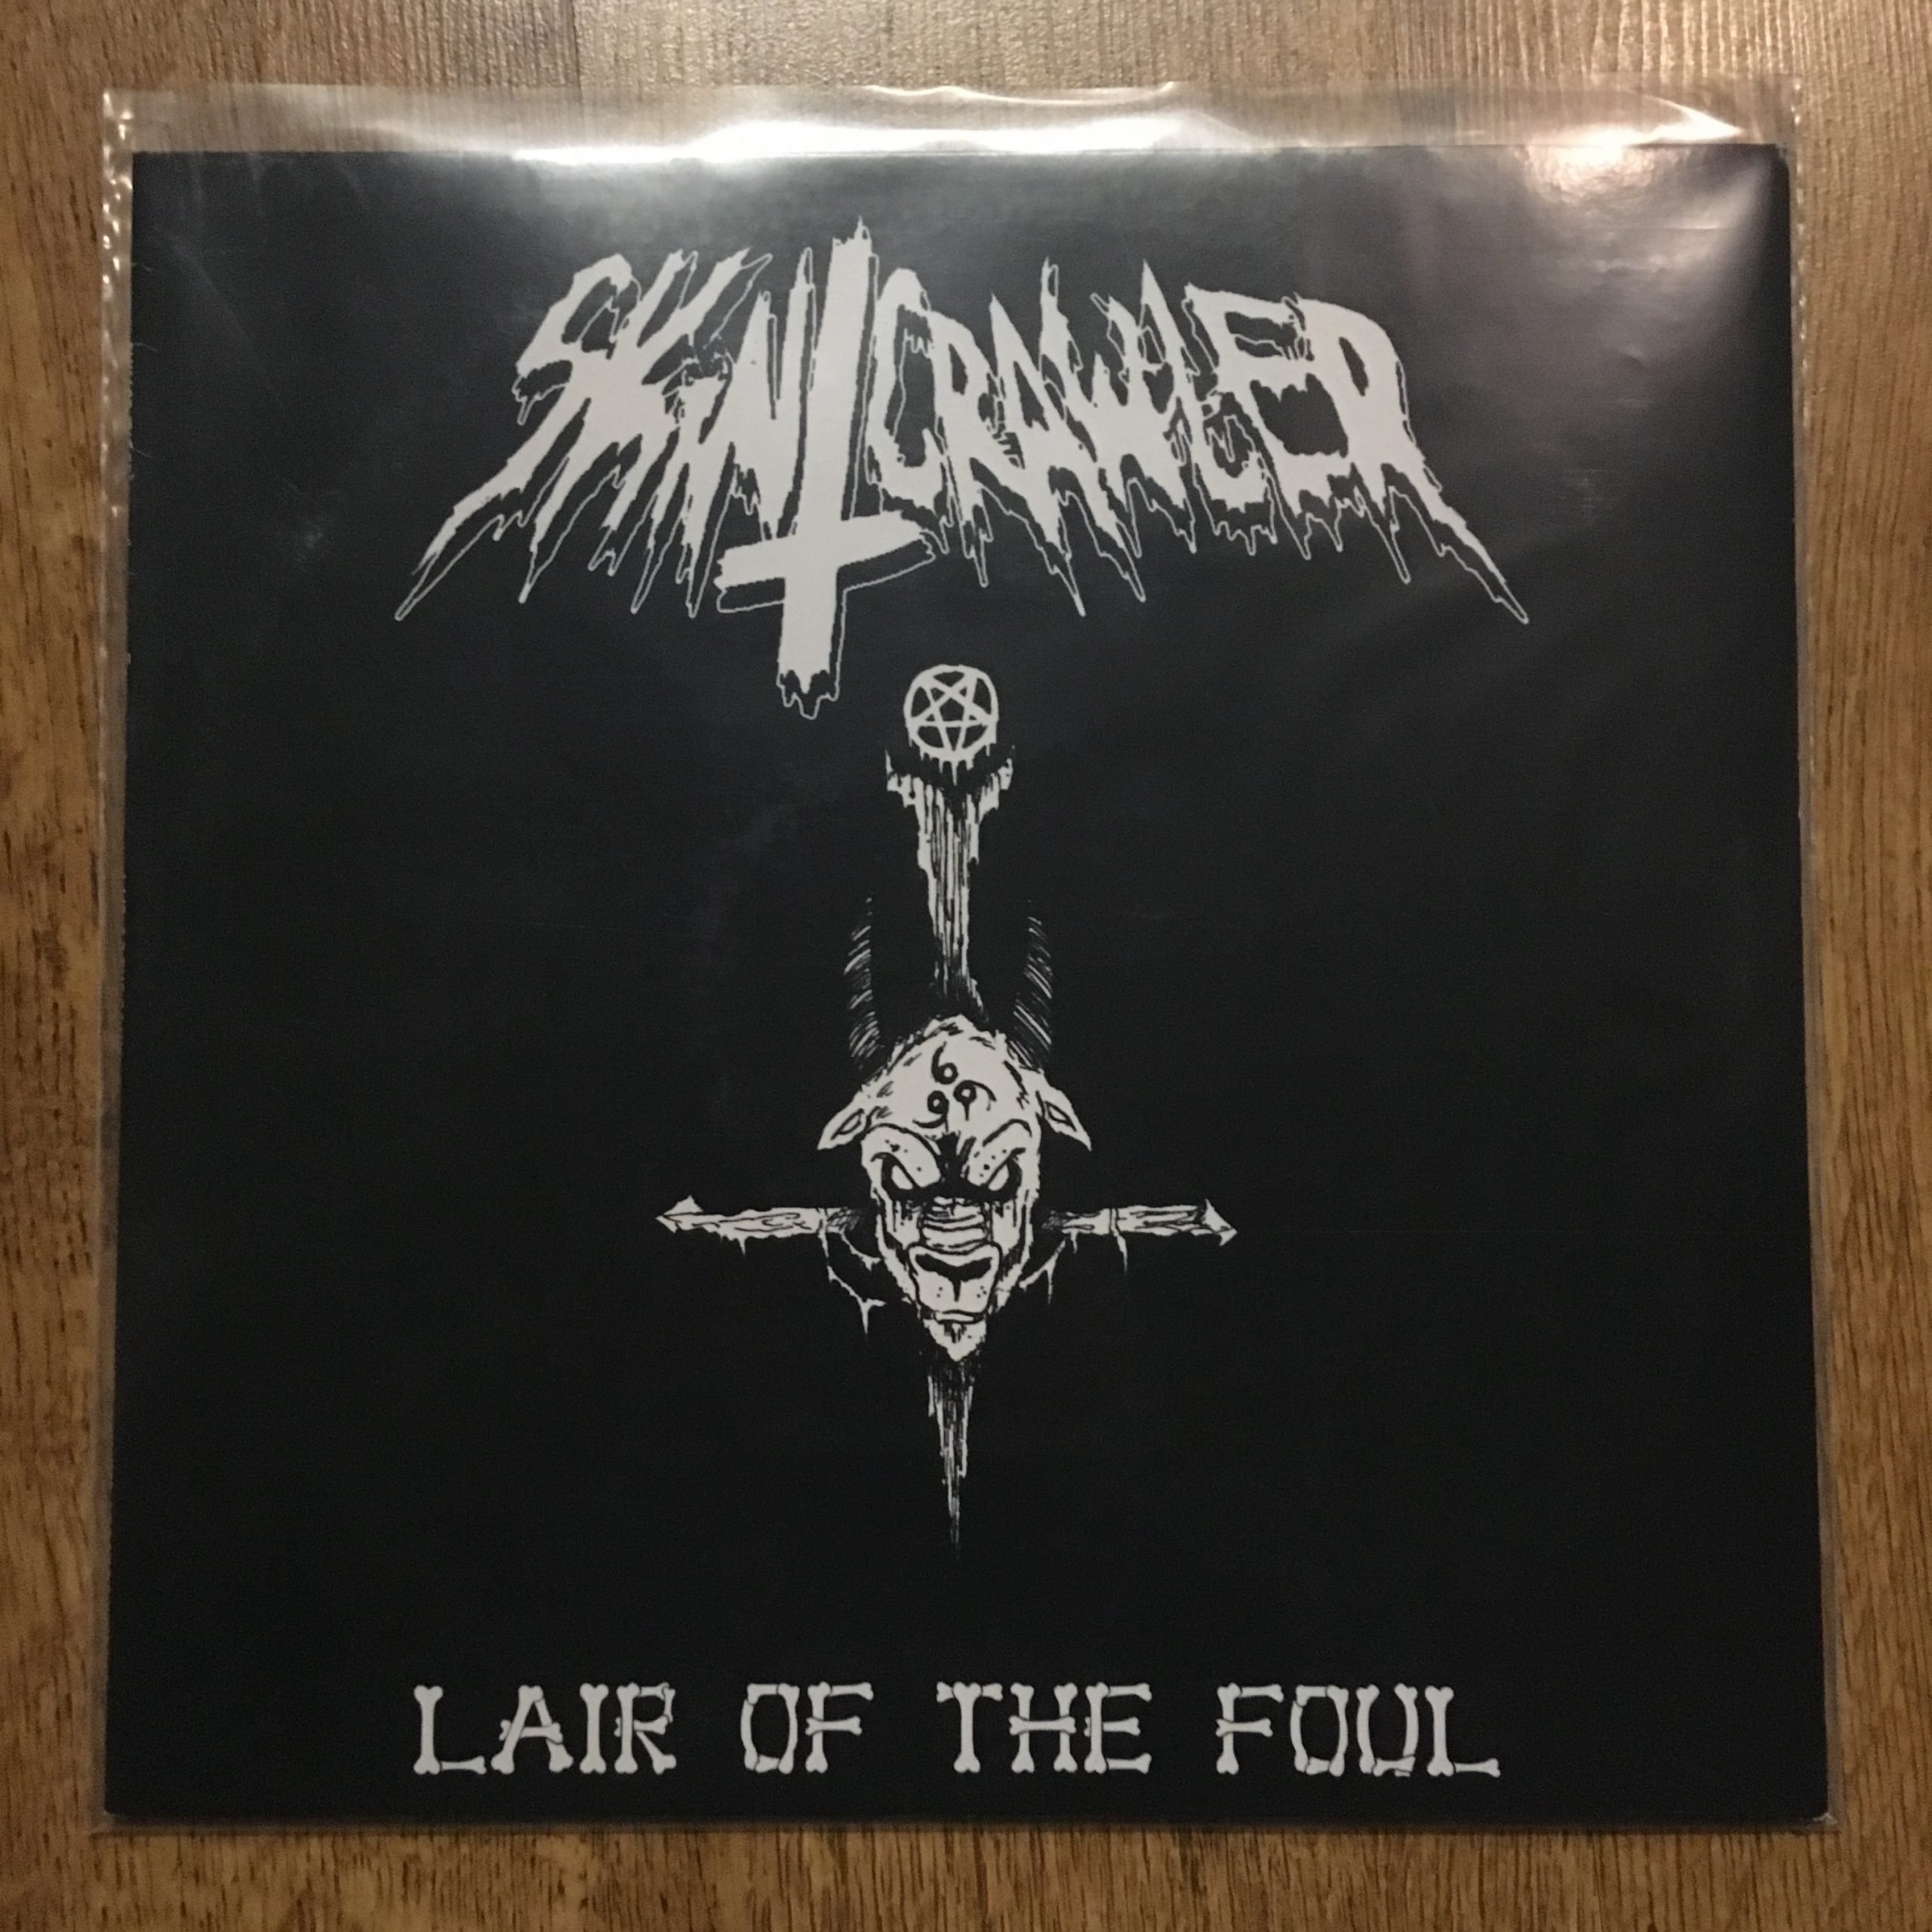 Photo of the Skincrawler - "Lair of the Foul" LP (Black vinyl)